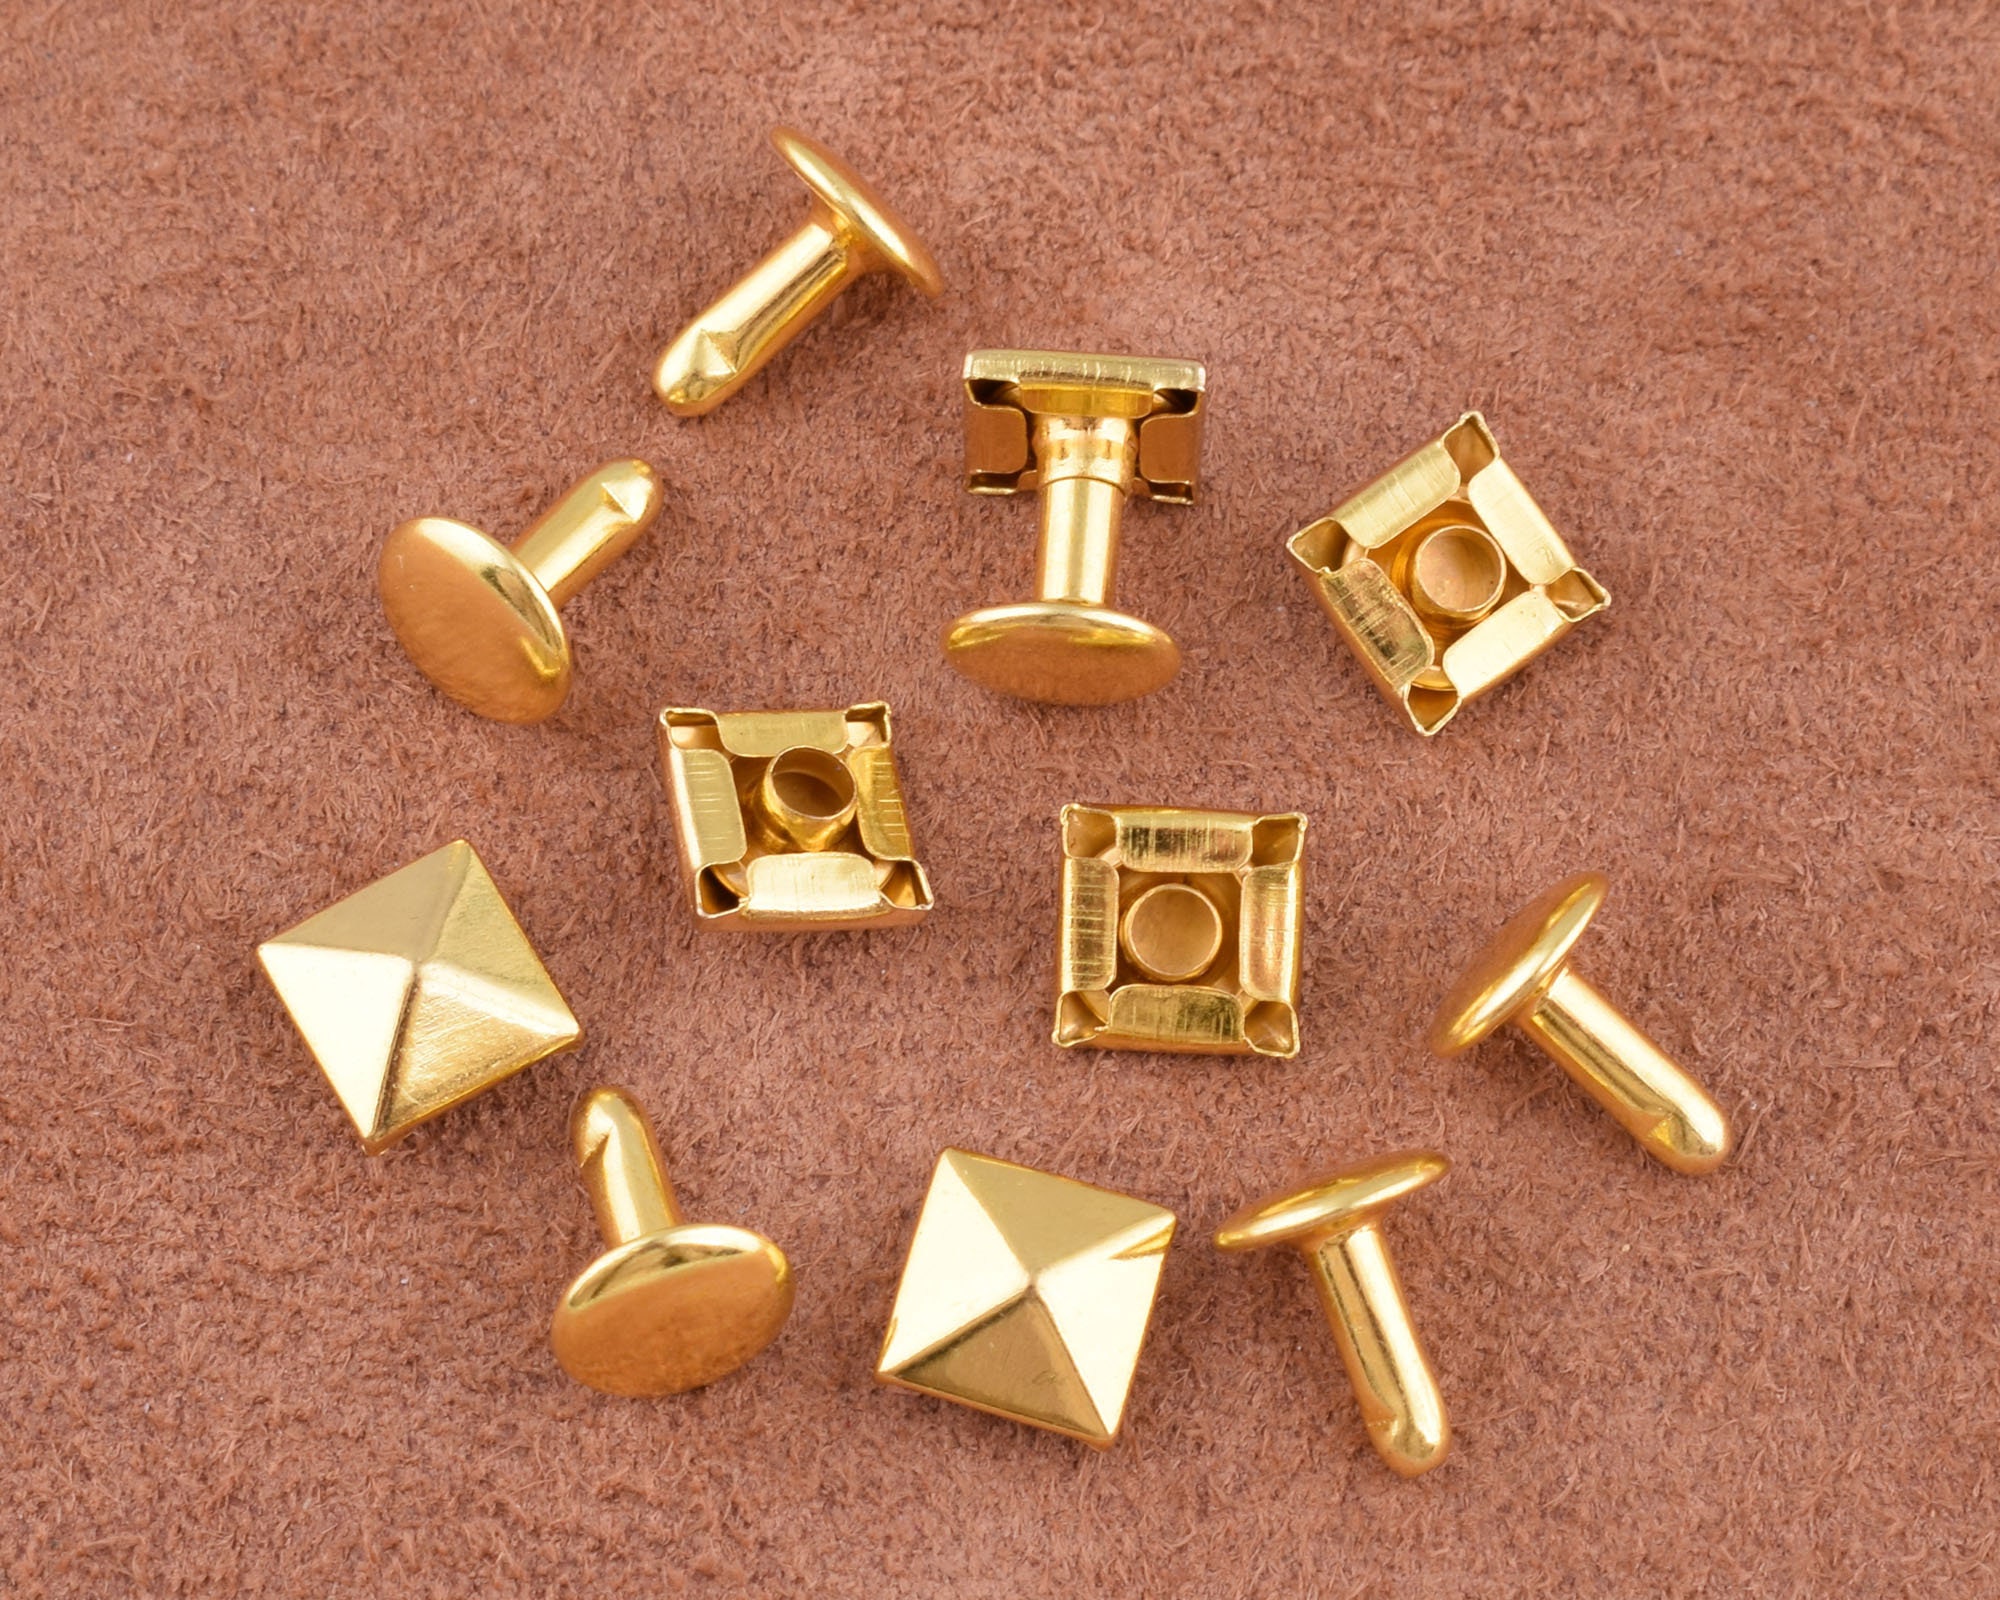 100pcs Punk Studs Cone Spike Spot Cool Rivets With Brass Pins for Leather  Jacket Belt Bags, Purses, Clothing DIY Crafts Supplies 11mm/13mm 